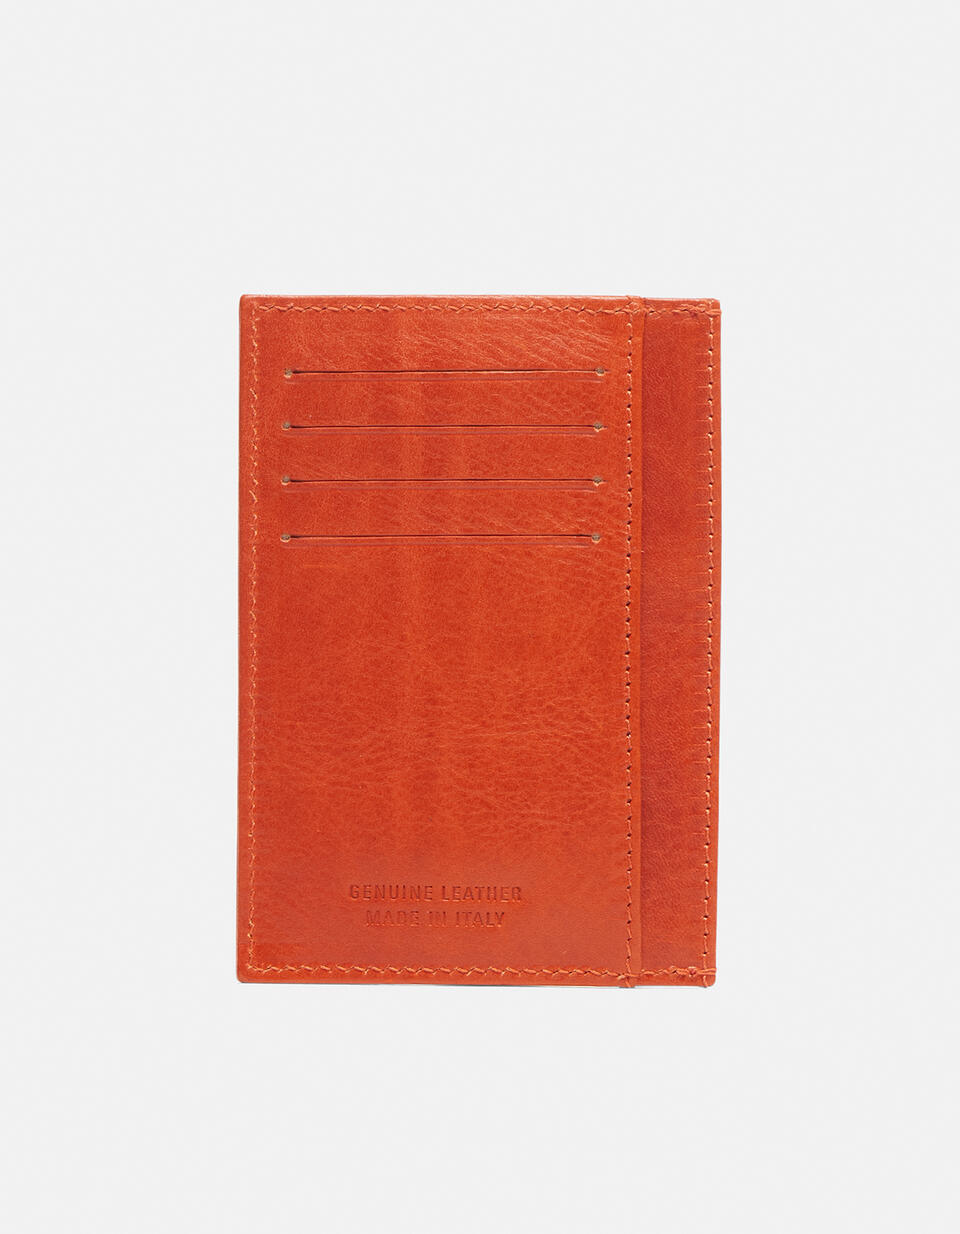 Leather briefcase - Card Holders - Women's Wallets | Wallets ARANCIO - Card Holders - Women's Wallets | WalletsCuoieria Fiorentina